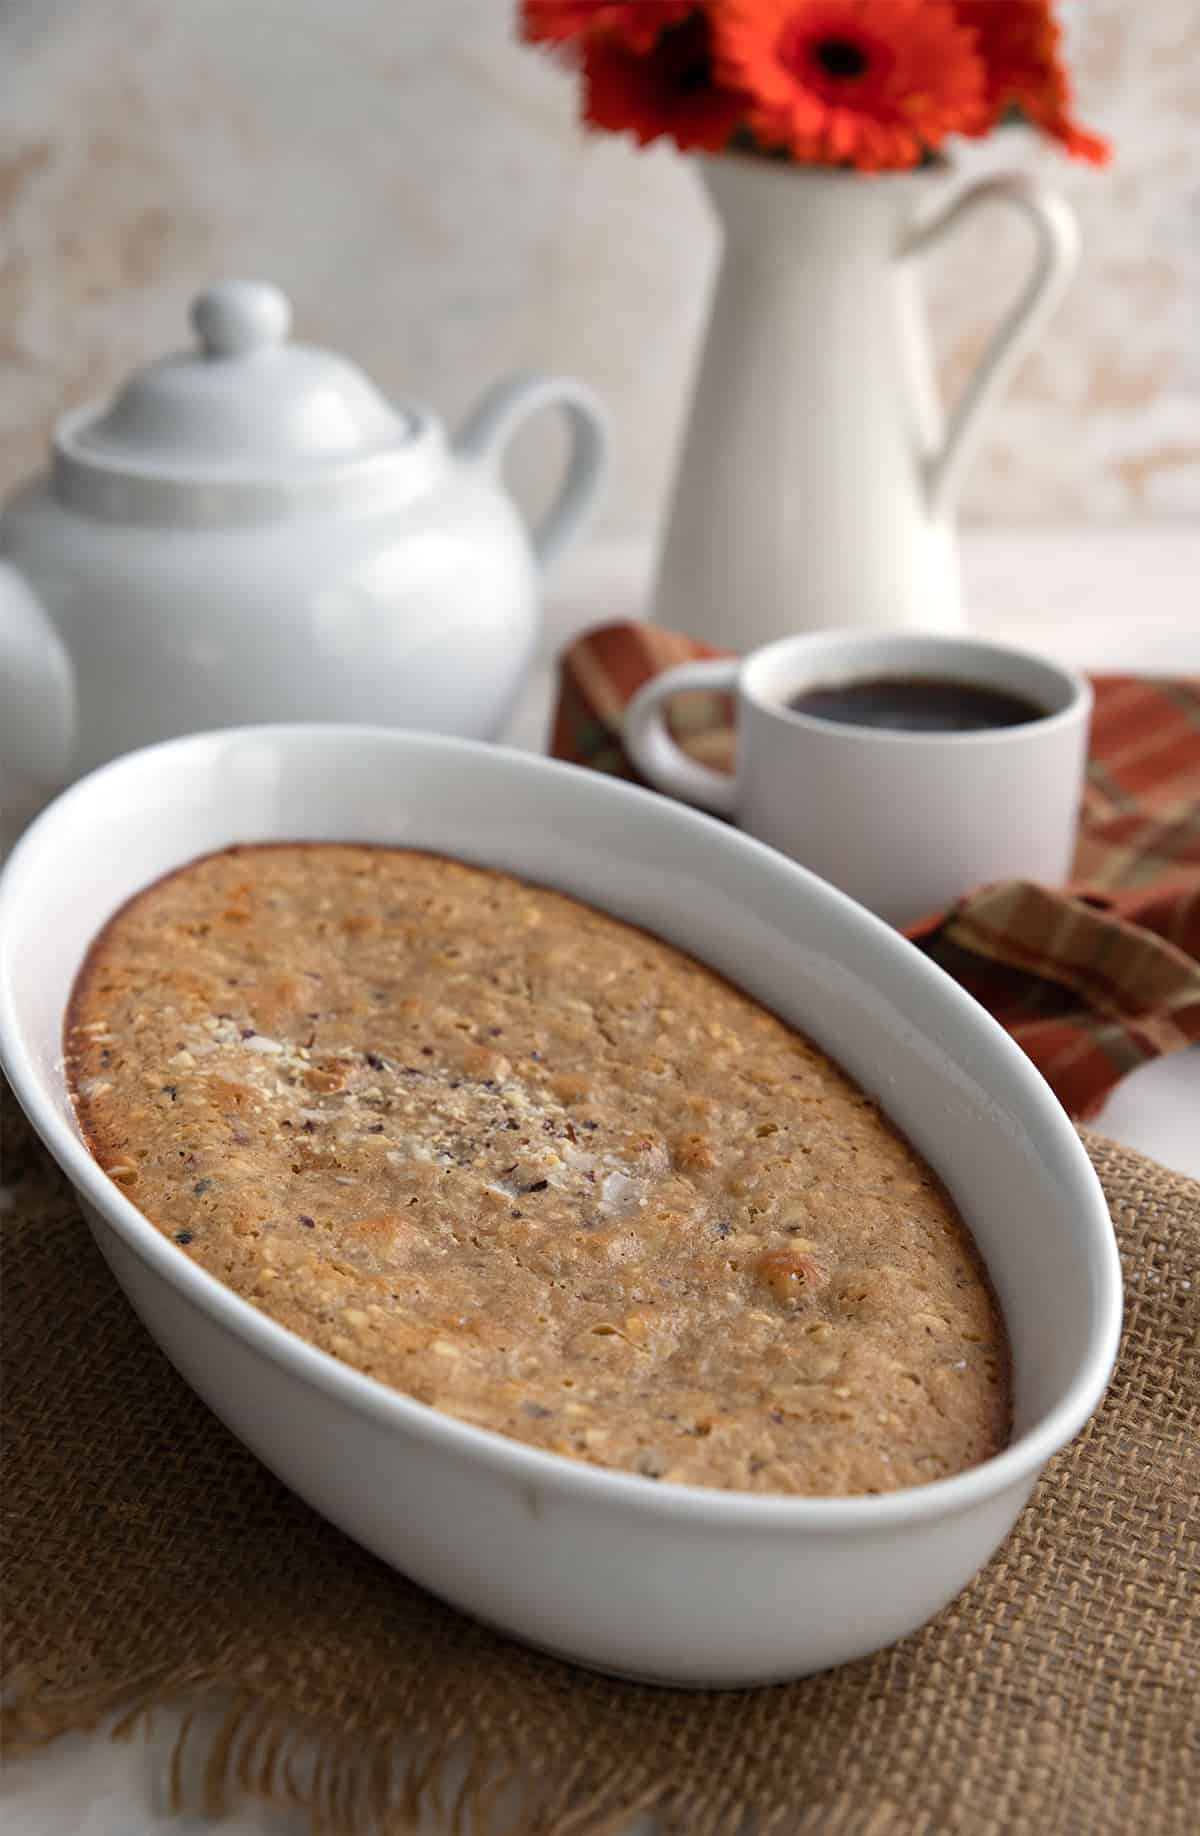 Keto oatmeal baked in a white oval dish.